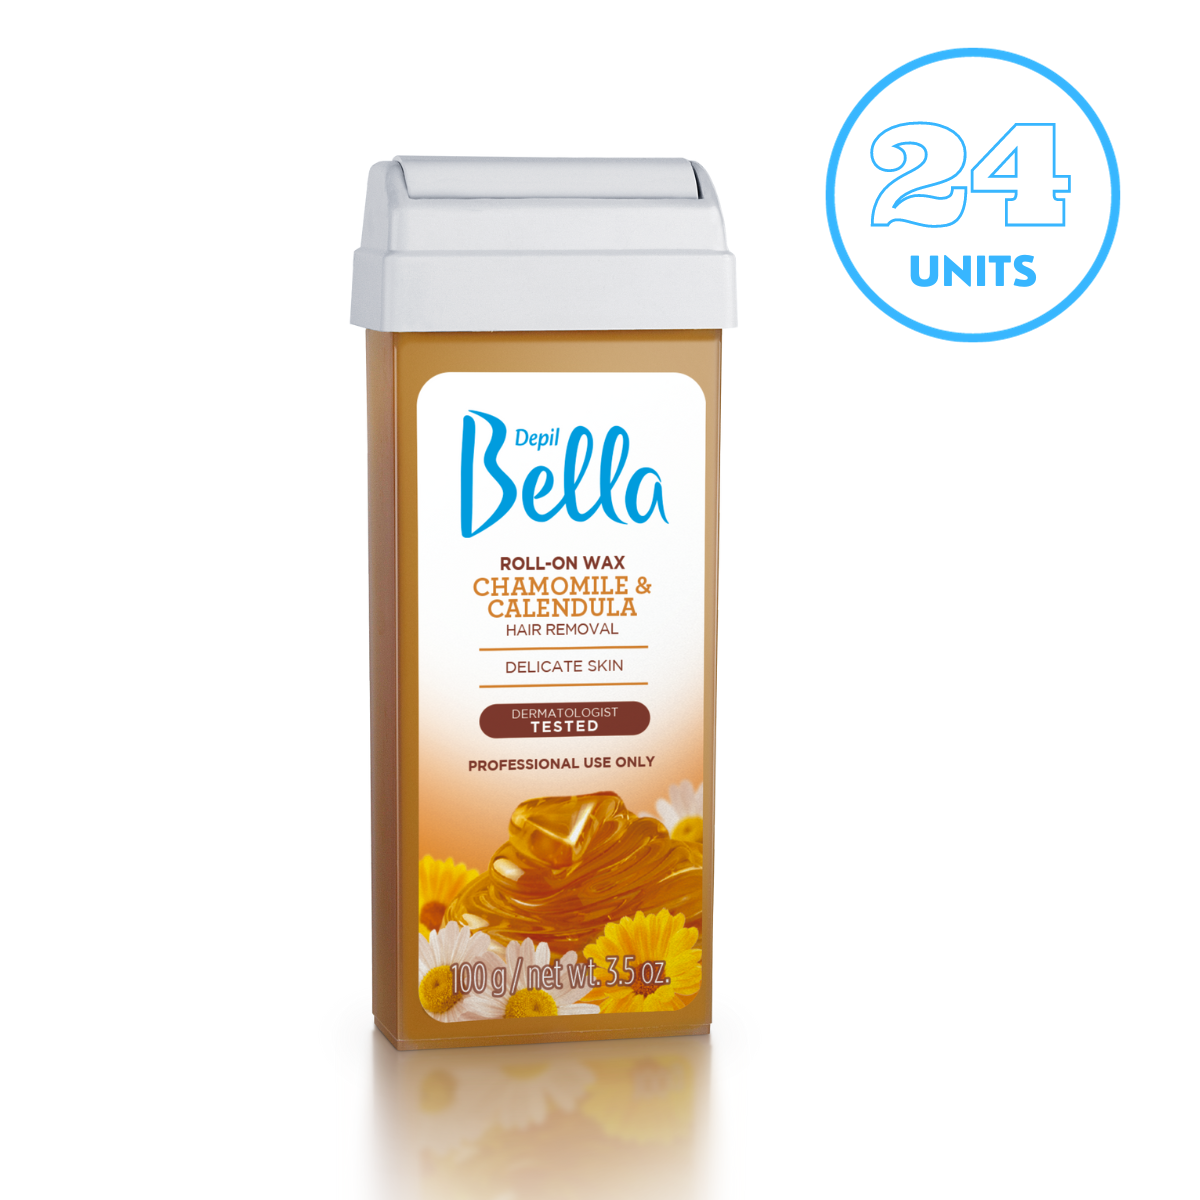 Depil Bella Chamomile and Calendula Roll-On Depilatory Wax, 3.52oz (24 Units offer) - Buy professional cosmetics dedicated to hair removal